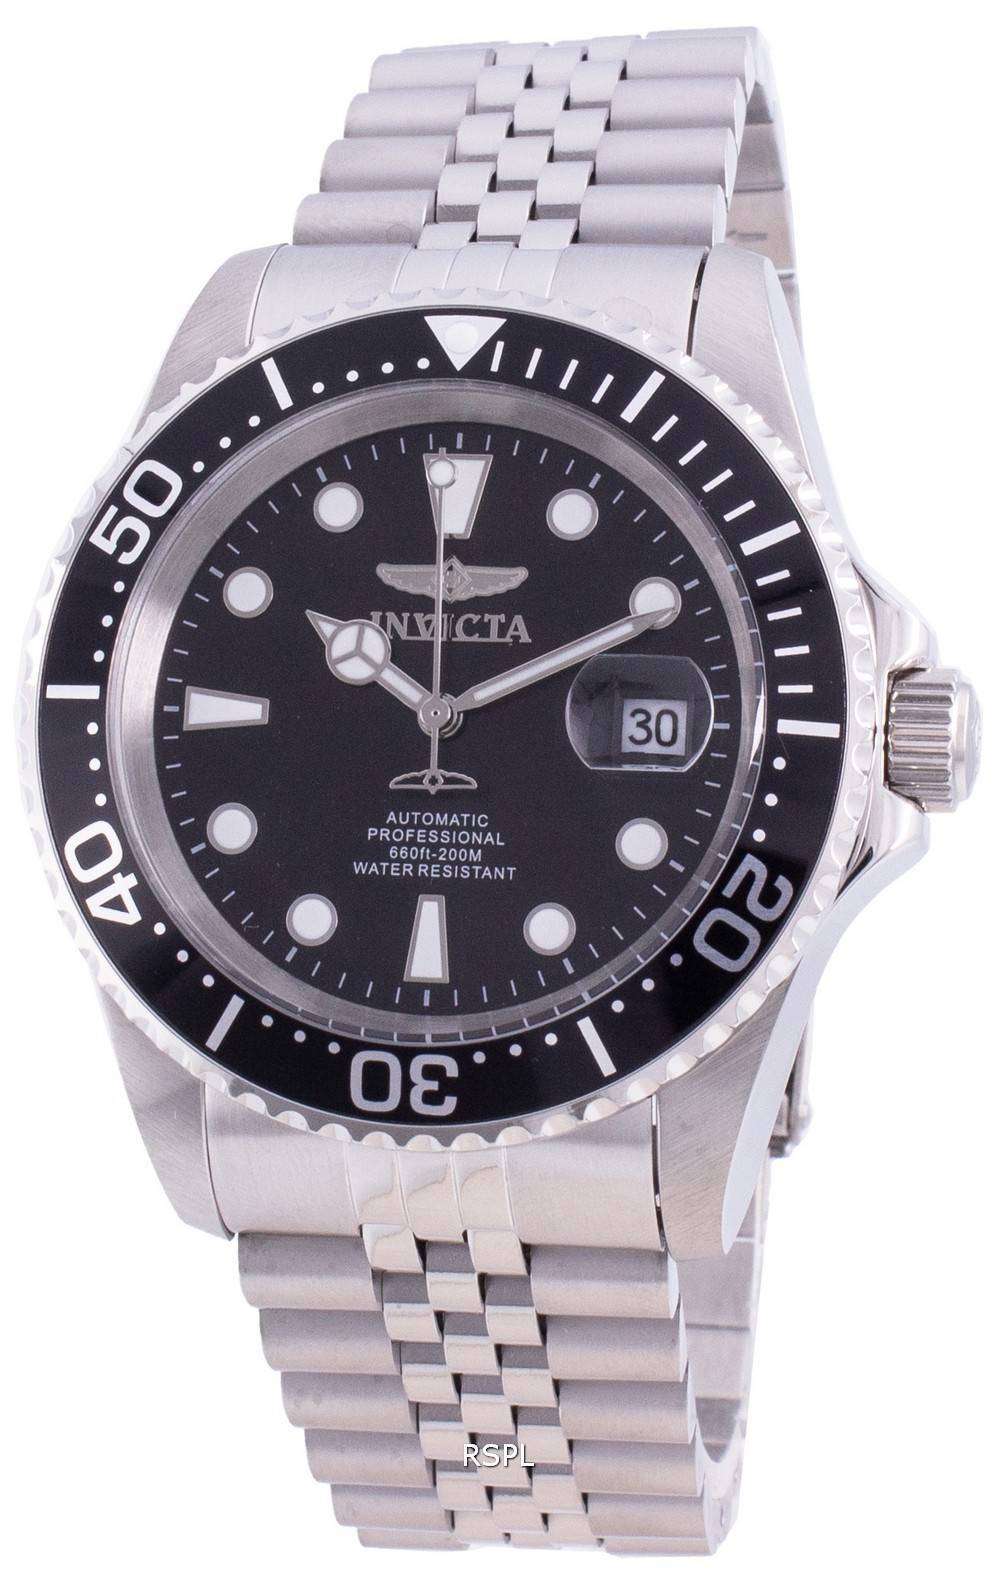 Invicta Watches Clearance Sale Top Sellers, 54% OFF | www.rupit.com